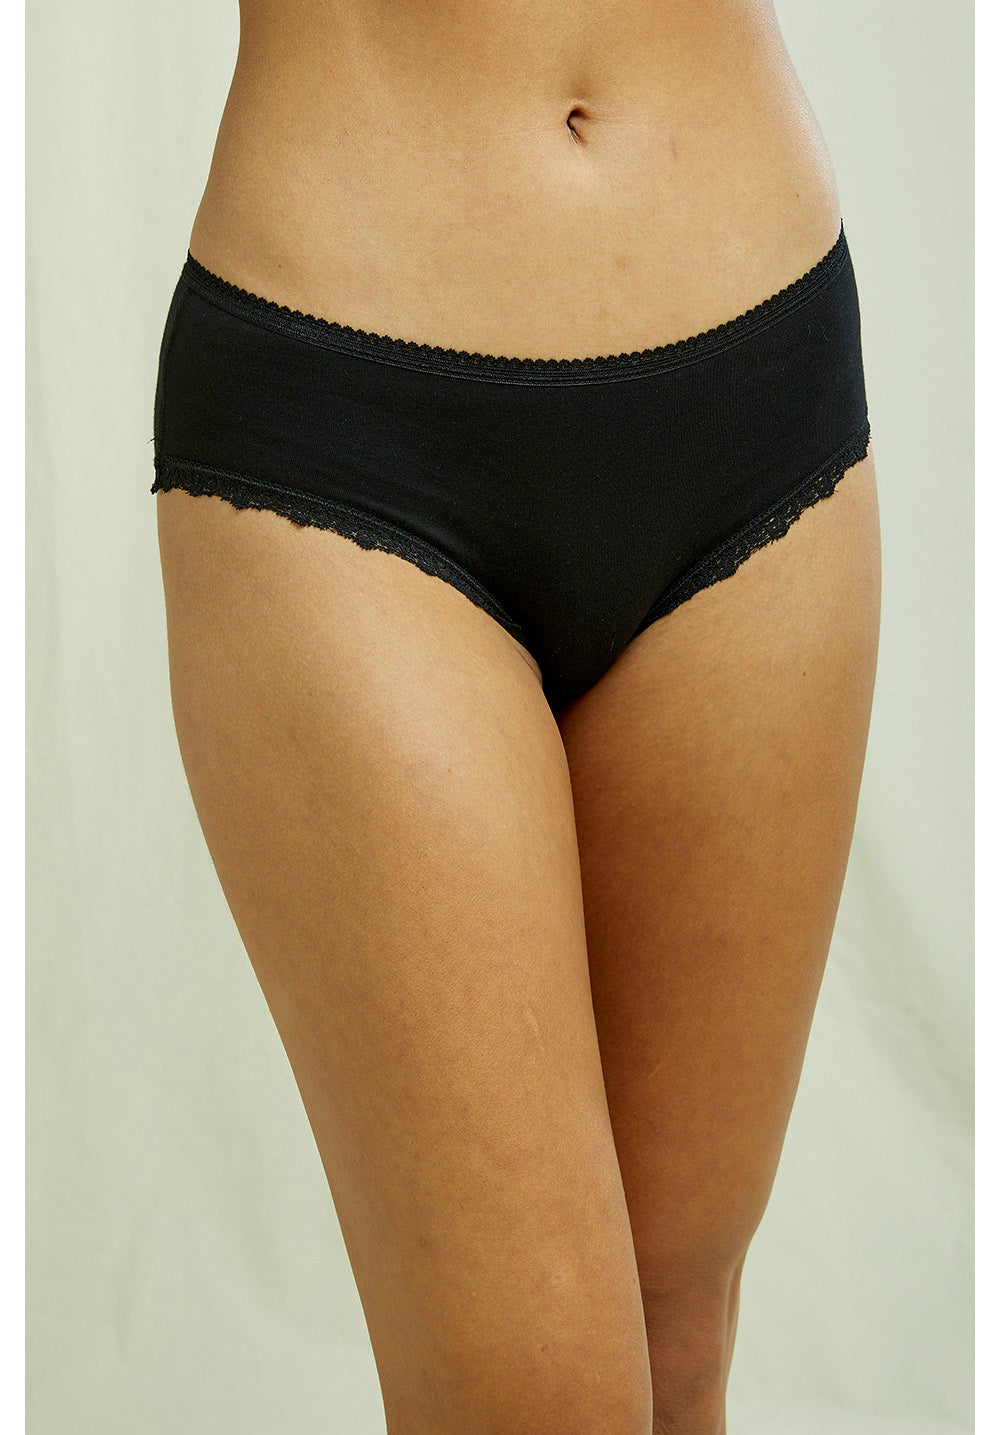 High waisted hipster brief with lace - Black - Sz. 42-60